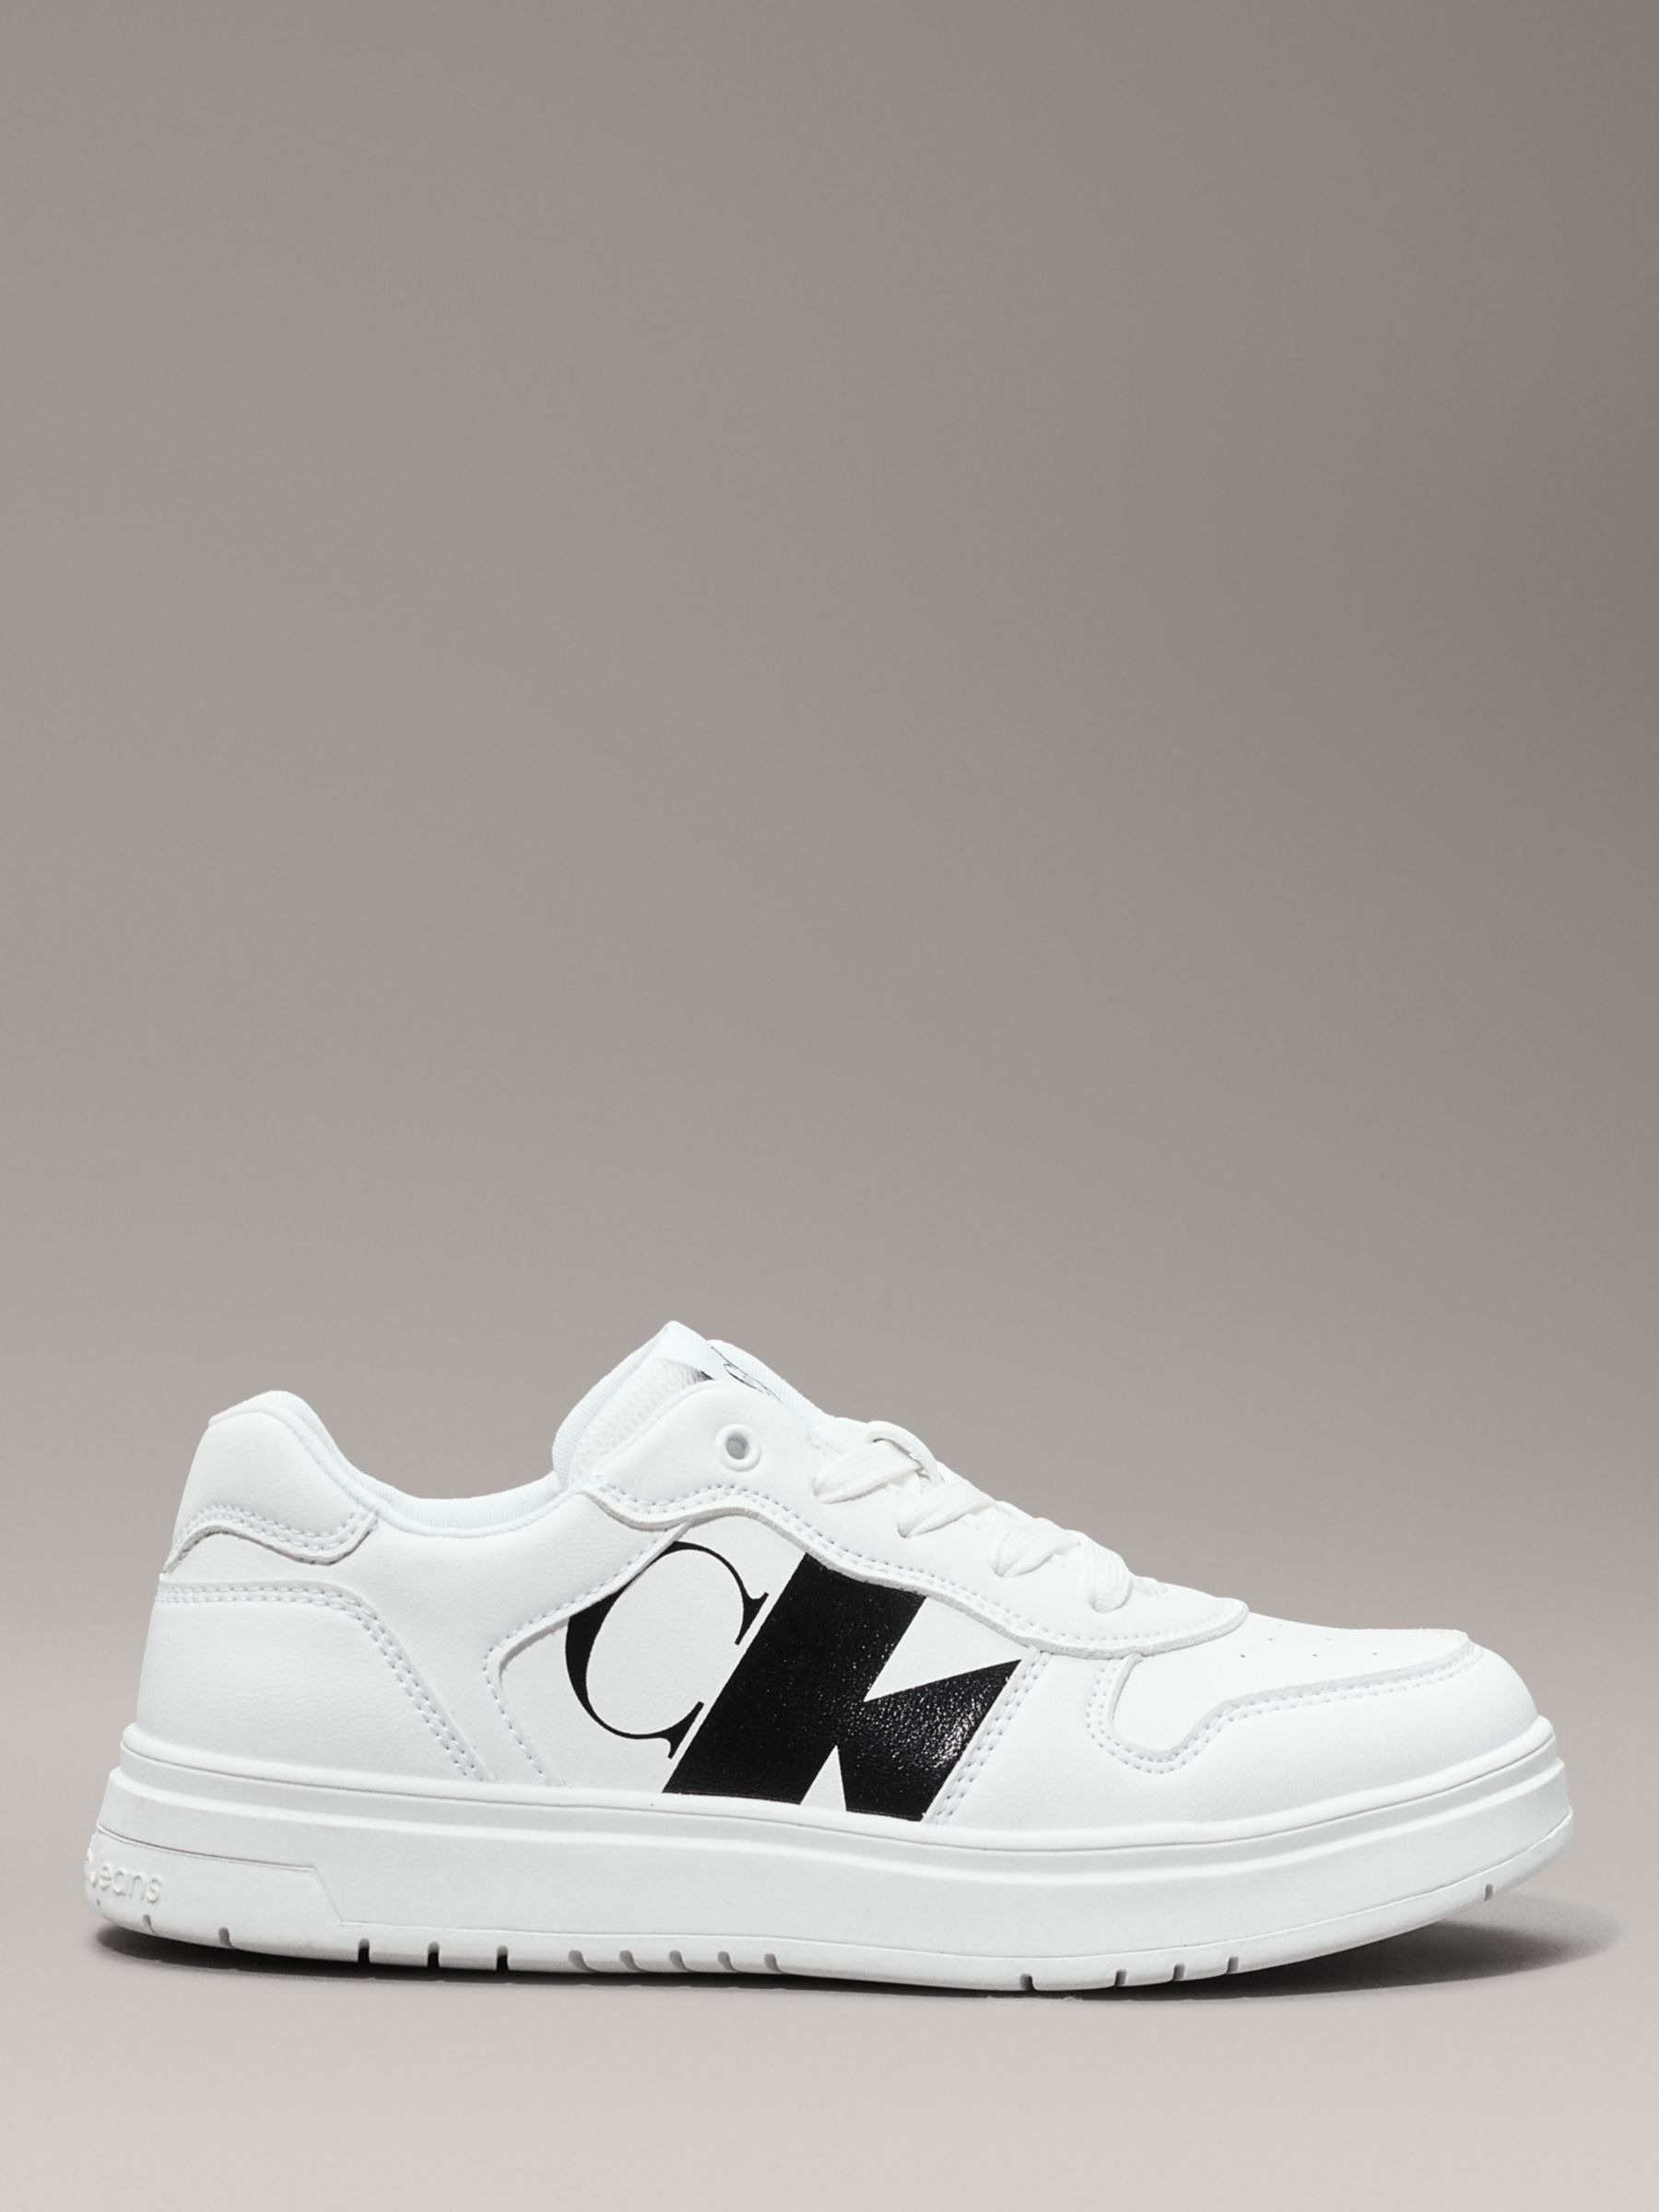 Calvin Klein Kids' CK Low Lace-Up Trainers, White, 11.5 Jnr